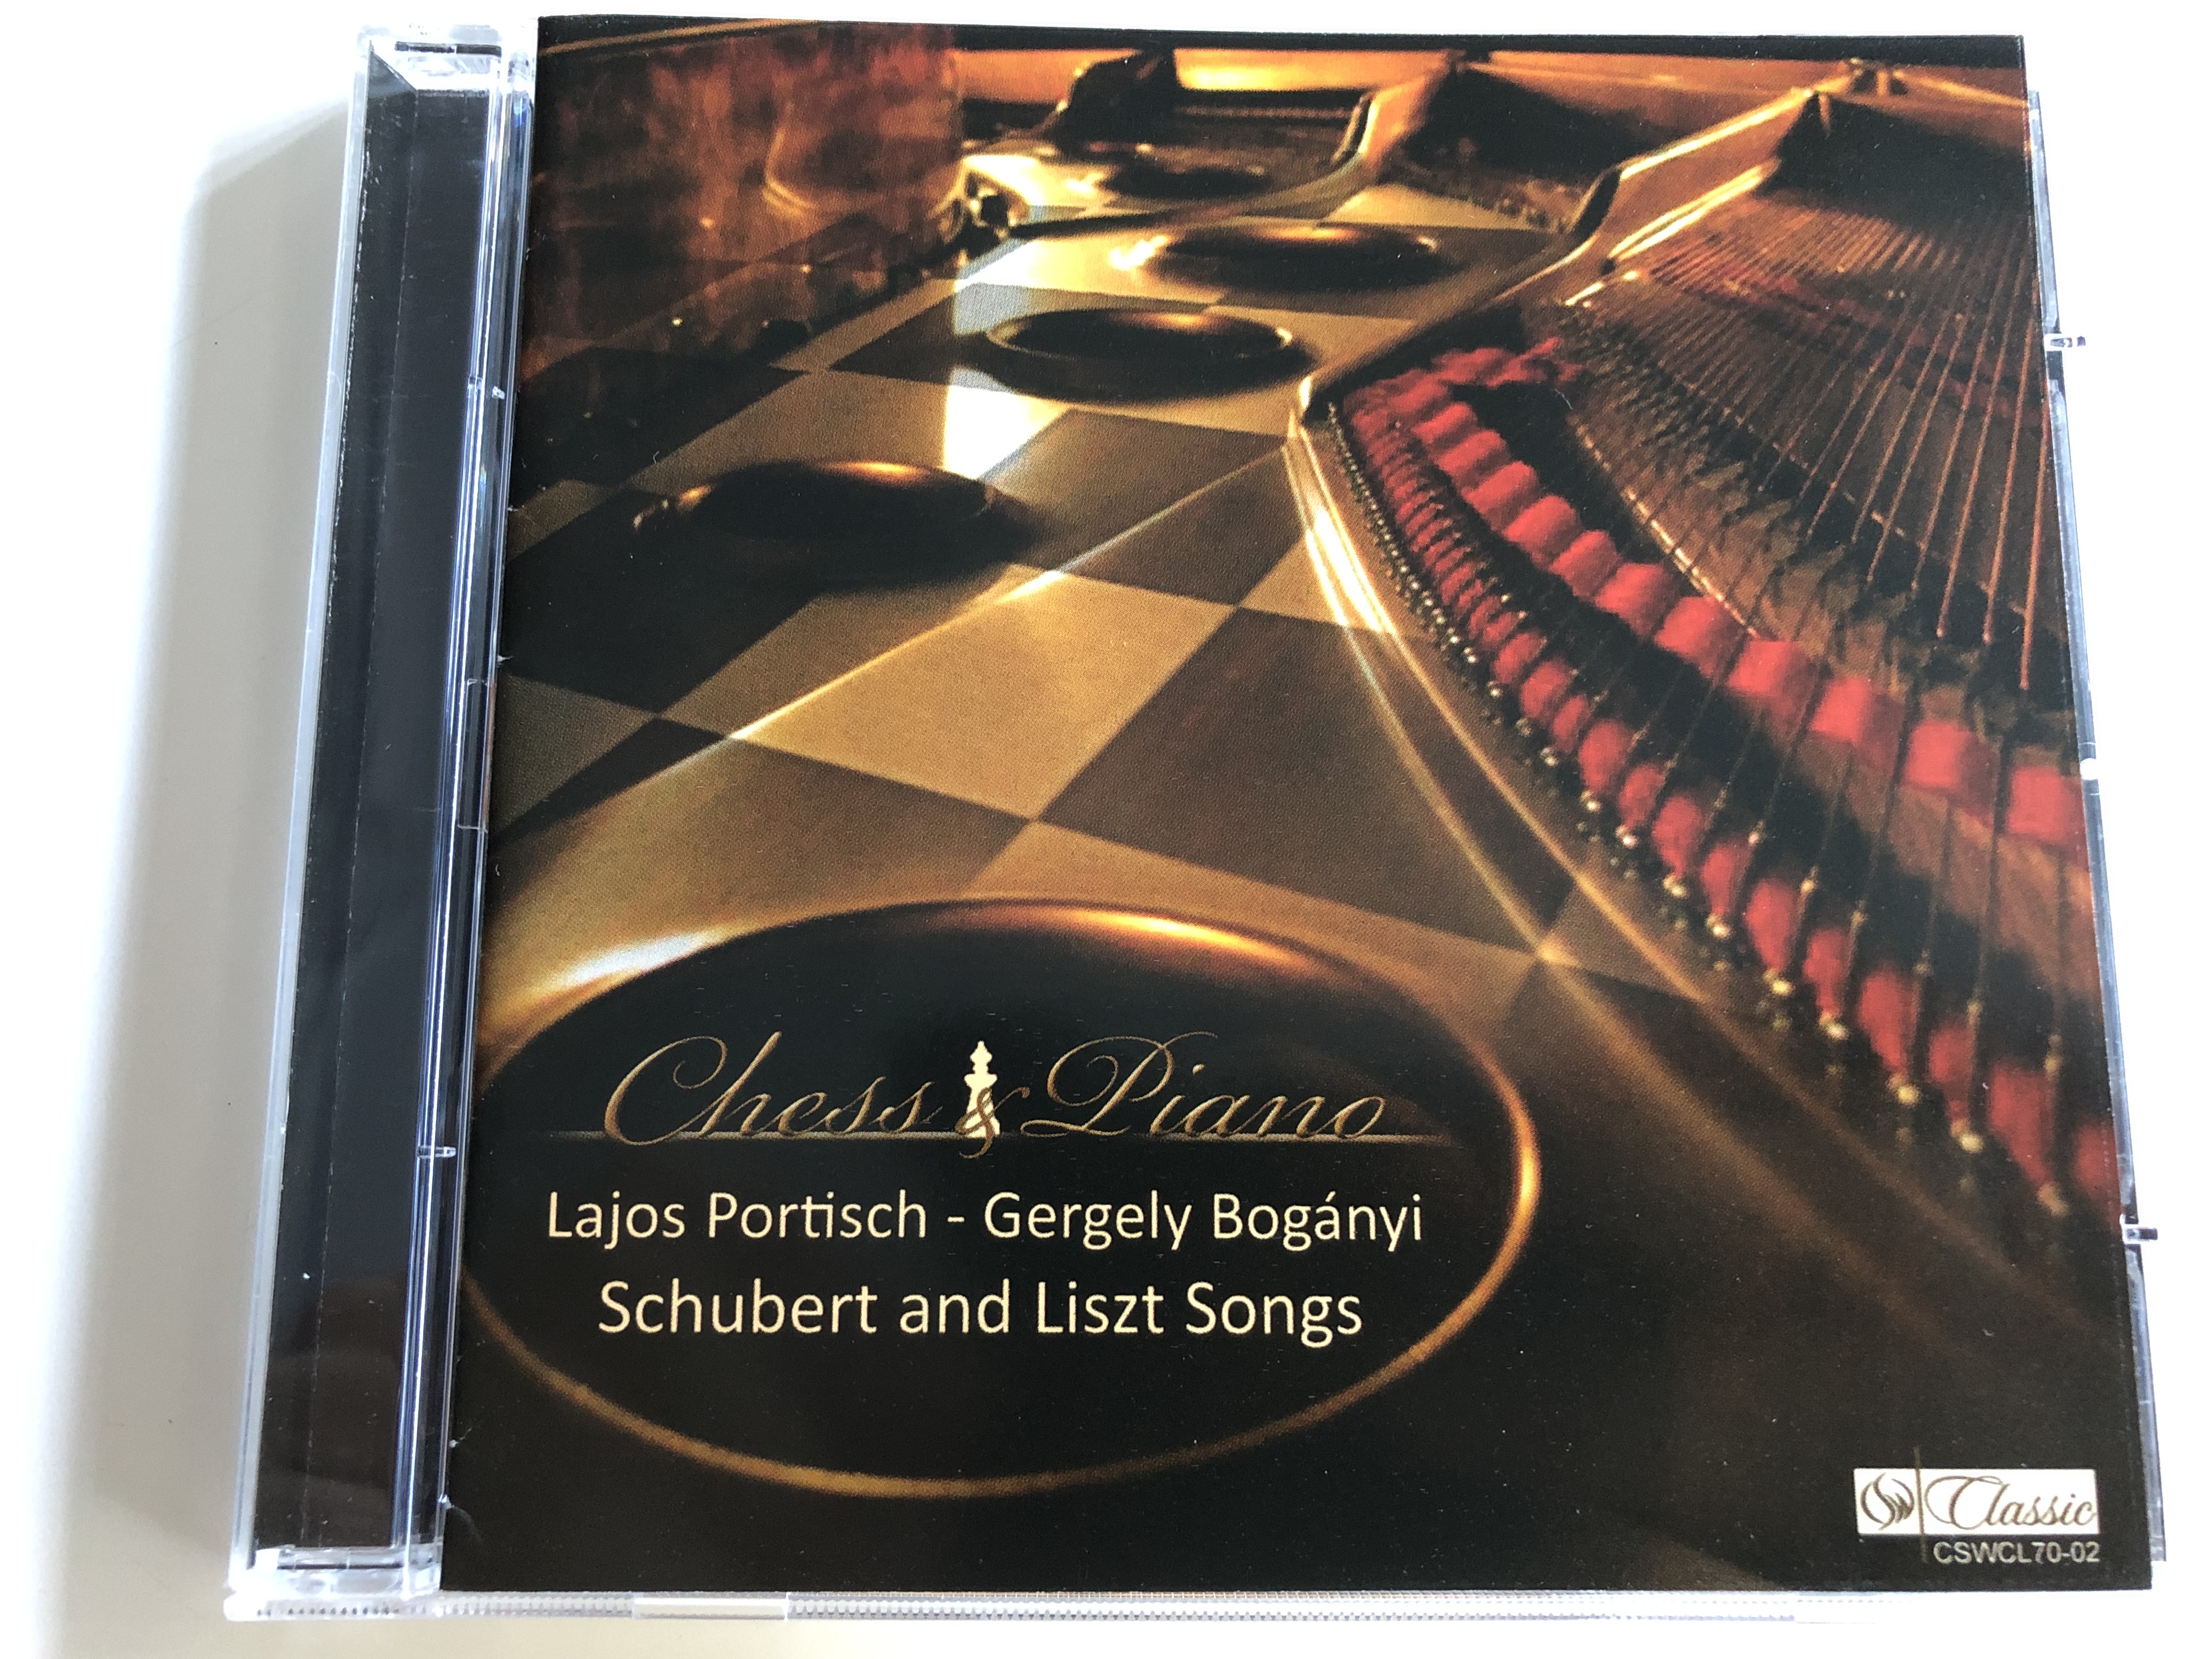 -chess-piano-lajos-portisch-gergely-bog-nyi-schubert-and-liszt-songs-audio-cd-2008-cswcl70-02-1-.jpg